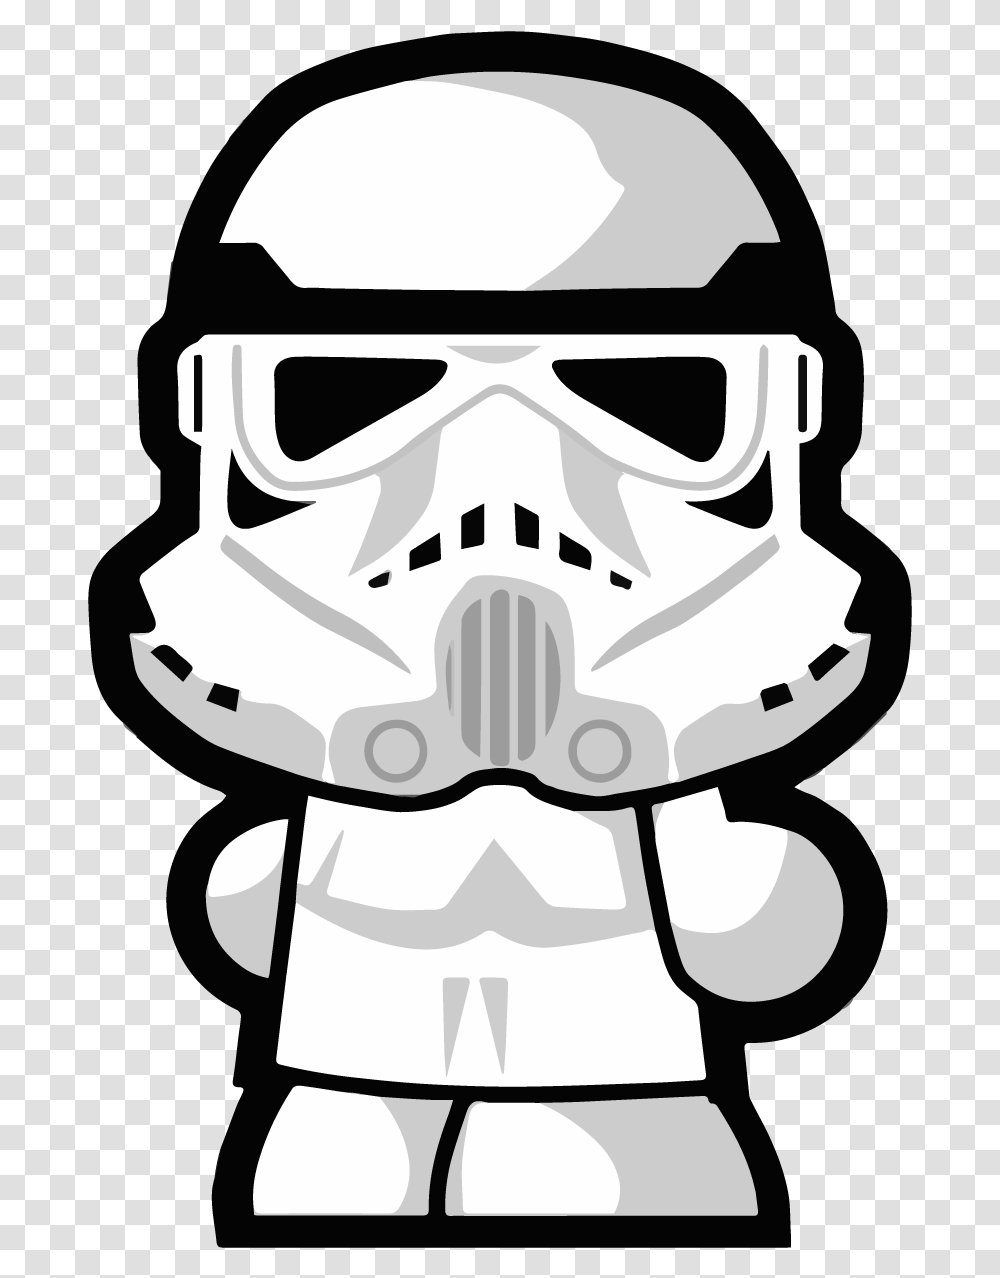 Icongenies New Trim Feature Removes Part Of The Icon Issue Stormtrooper Vector, Sunglasses, Helmet, Clothing, Stencil Transparent Png